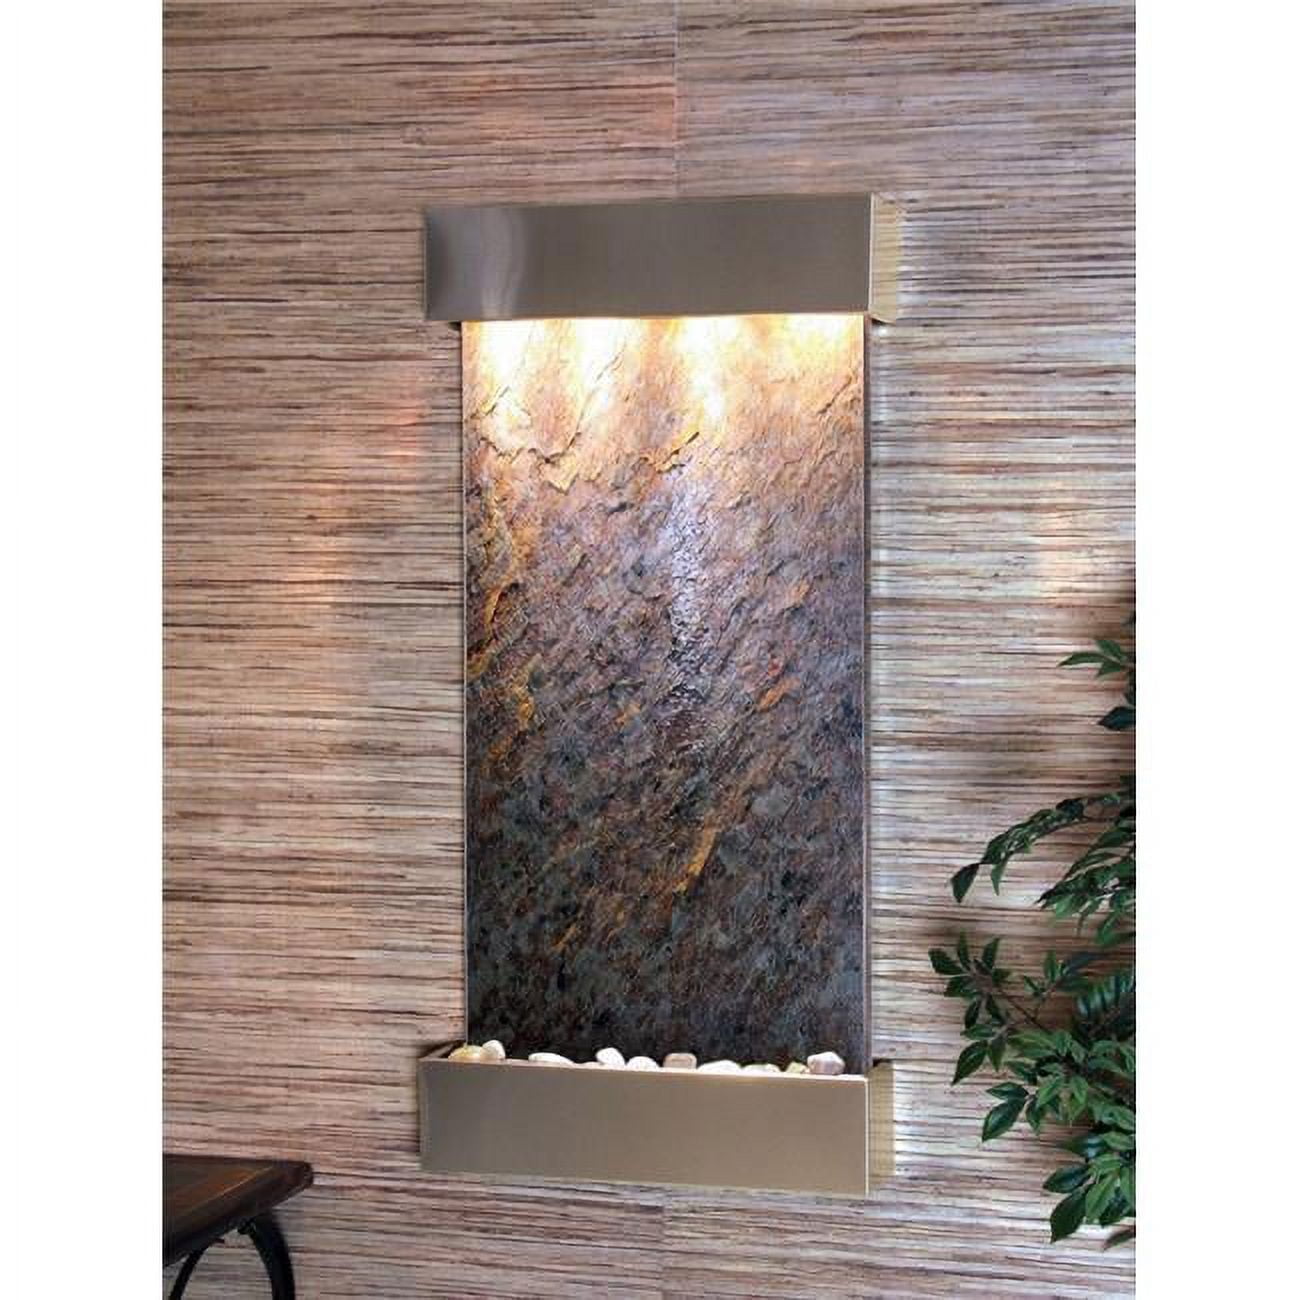 Adagio WCS2012 Whispering Creek Stainless Steel Green Featherstone Wall Fountain